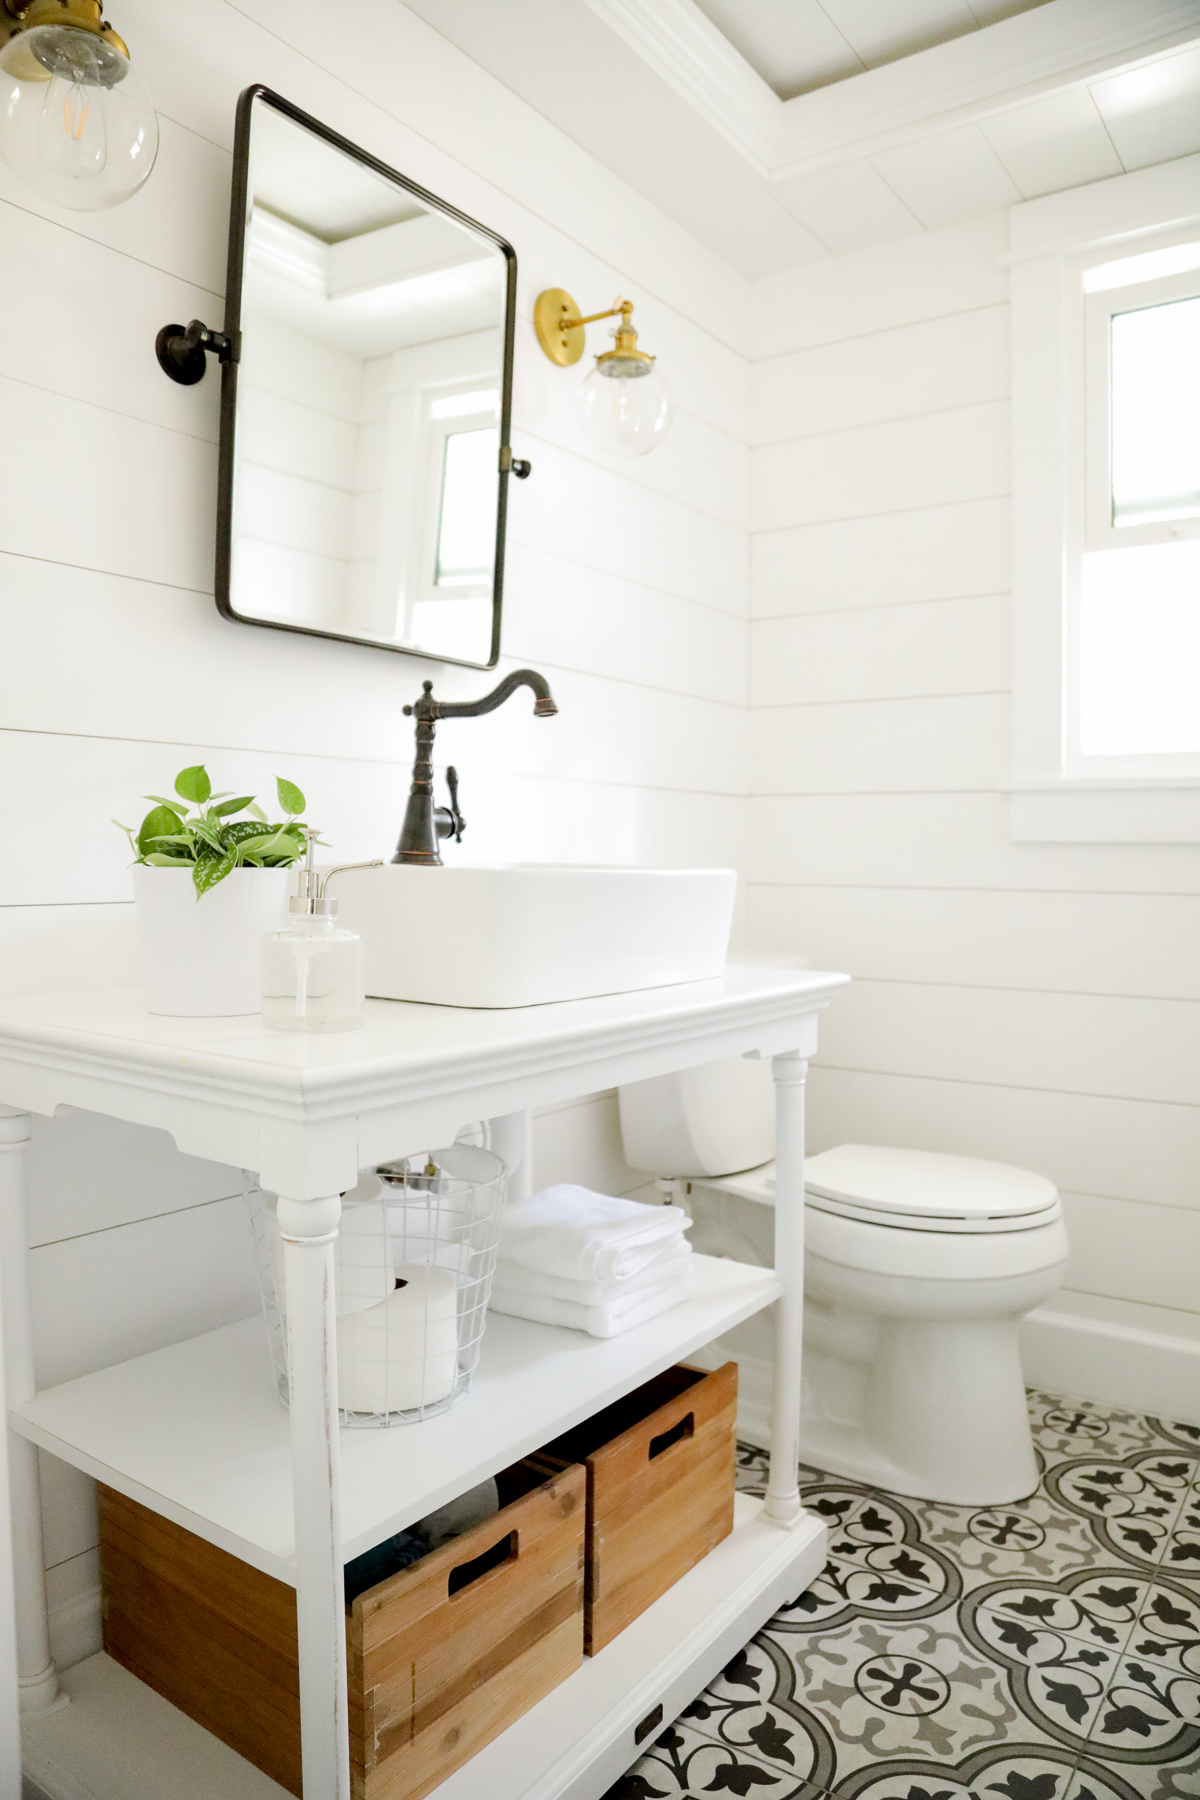 How to Make The Best Non-Toxic Natural Bathroom Cleaners